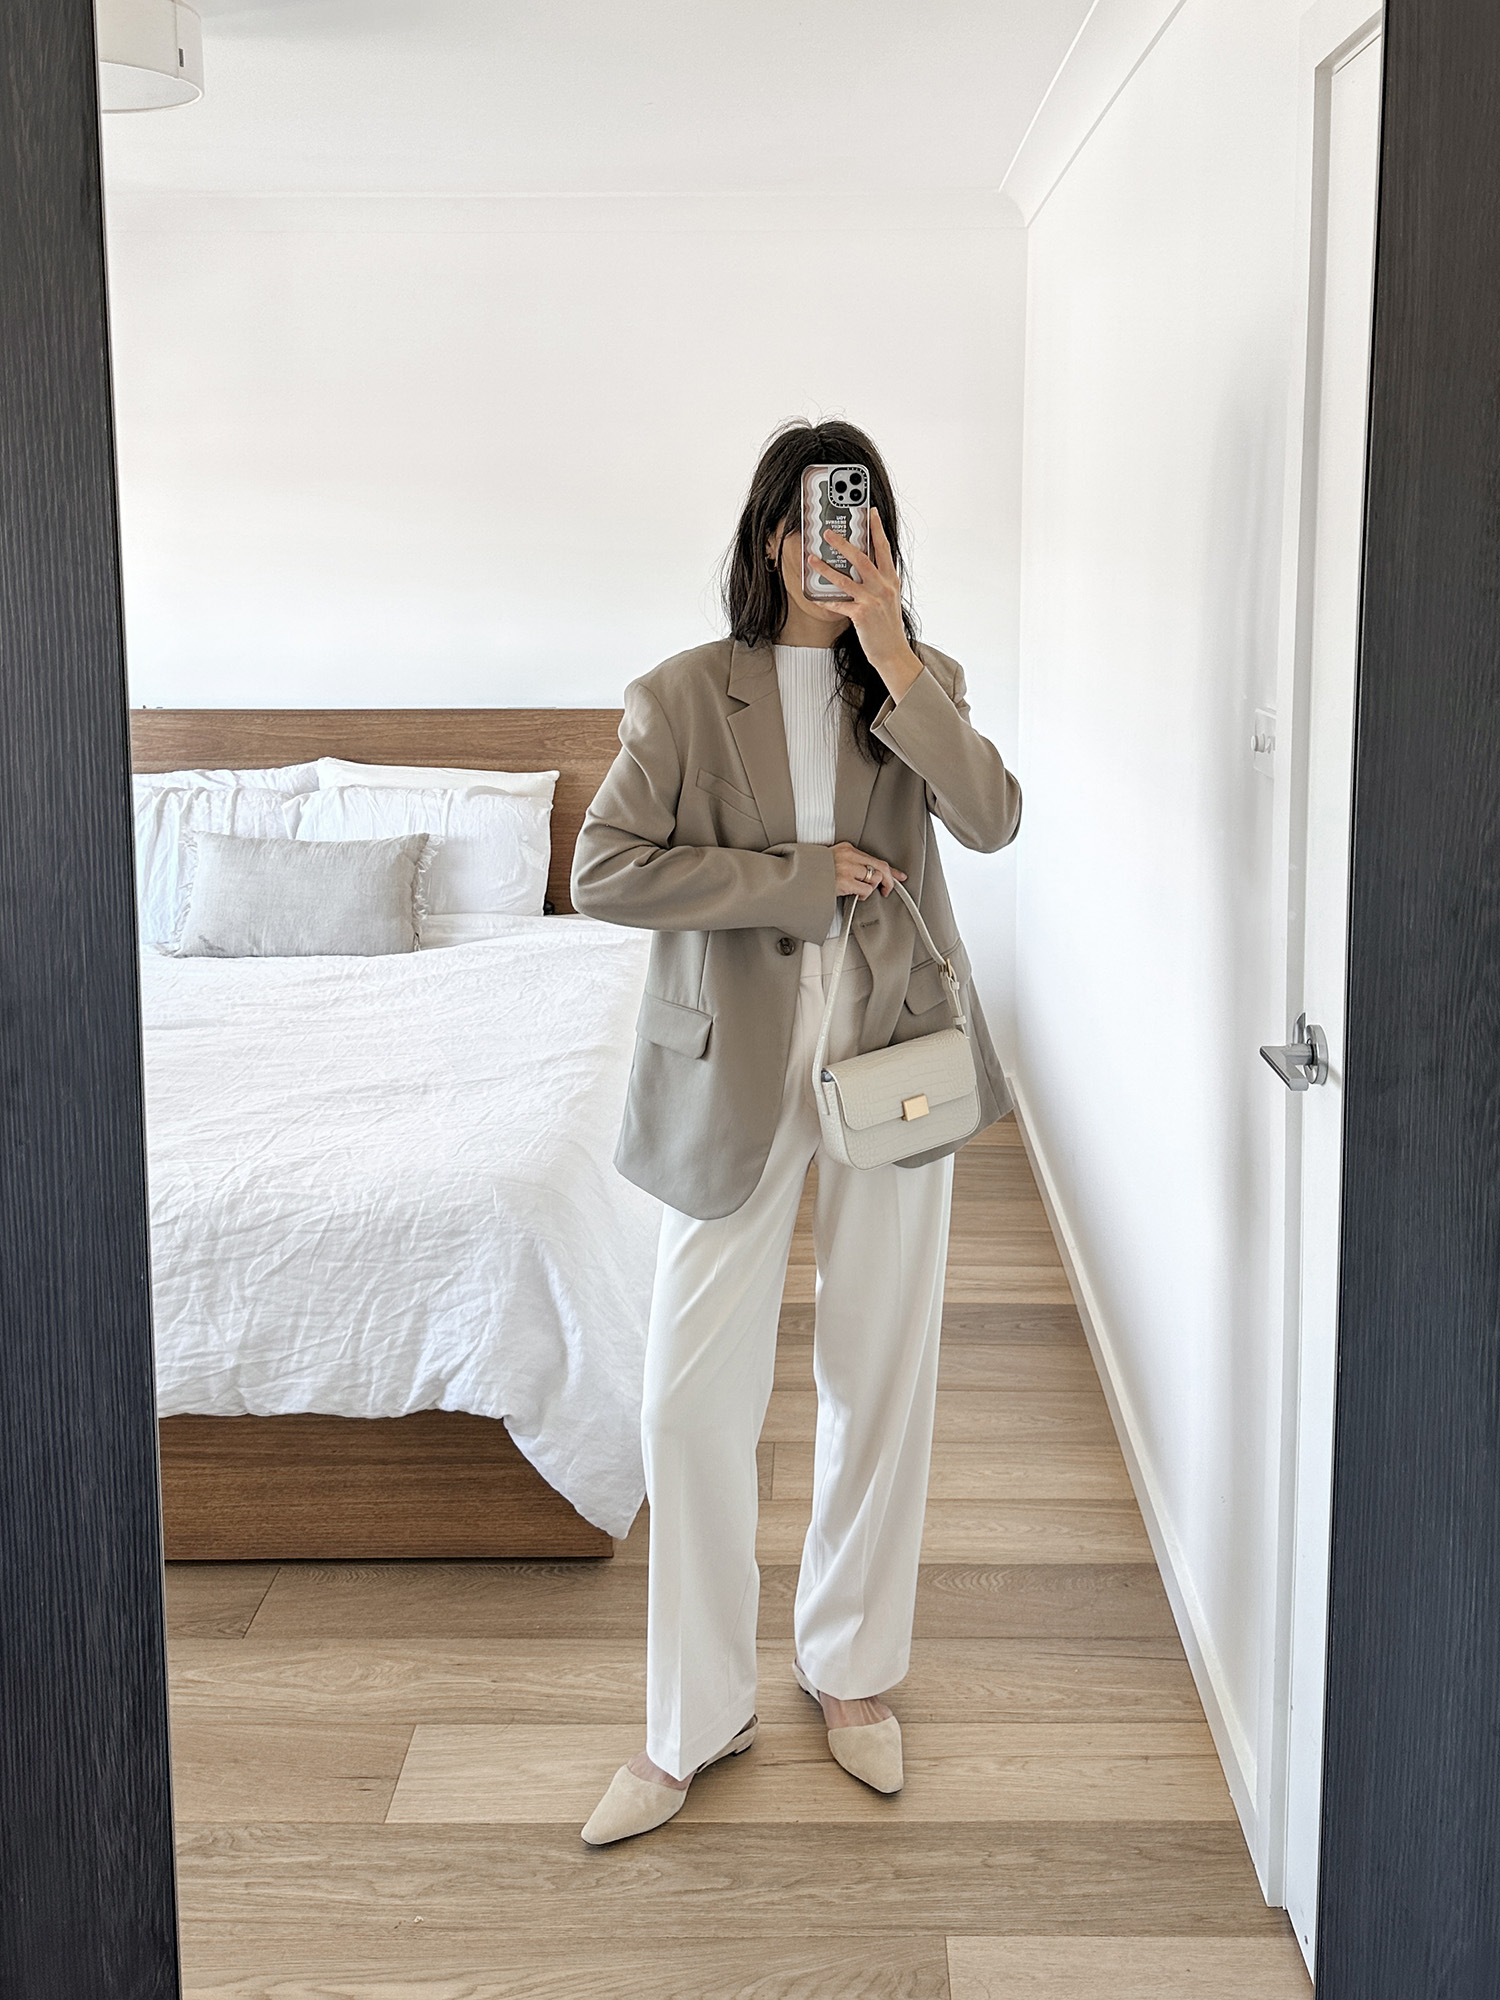 DISSH pleated top with Uniqlo Pleated Wide Pants and Arket Wool Hopsack blazer